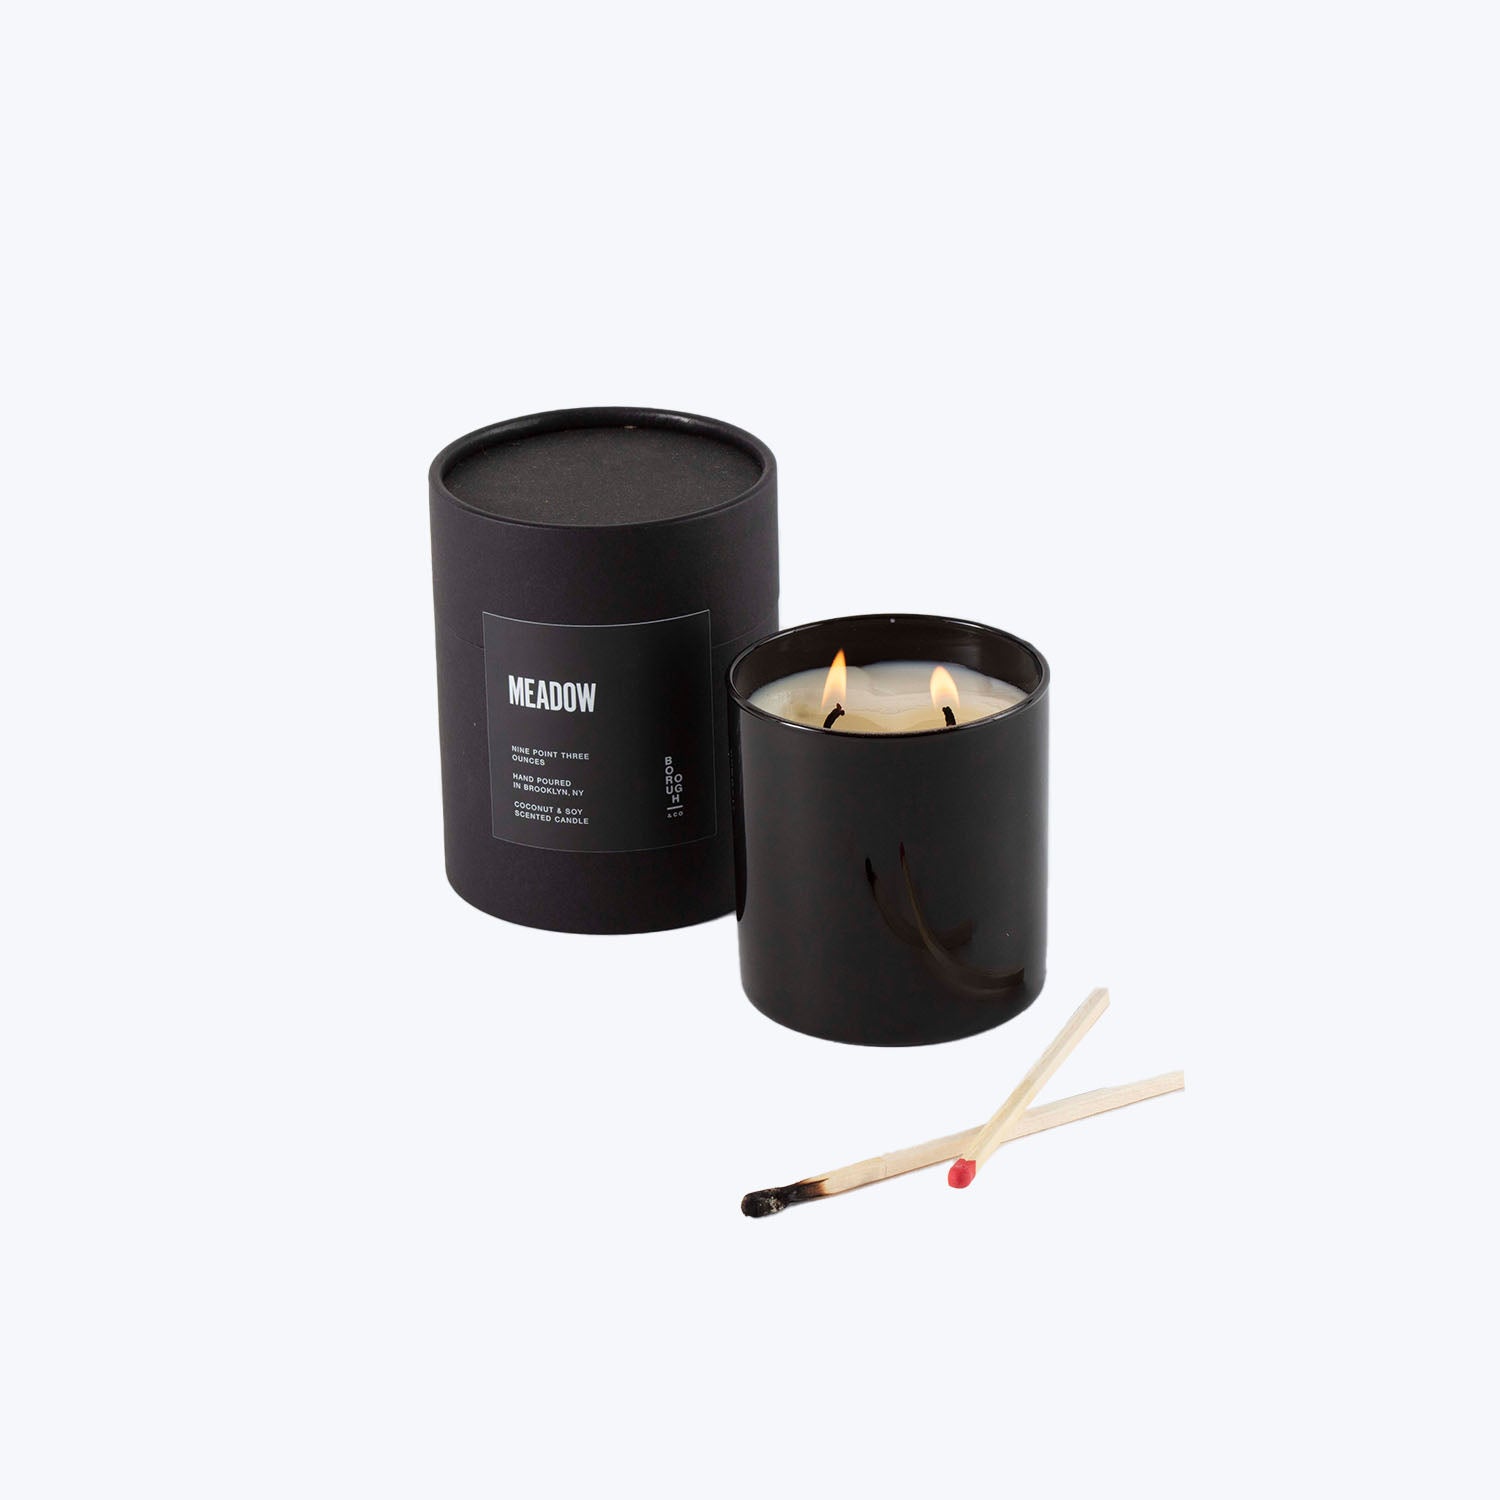 Minimalist Candle-Meadow